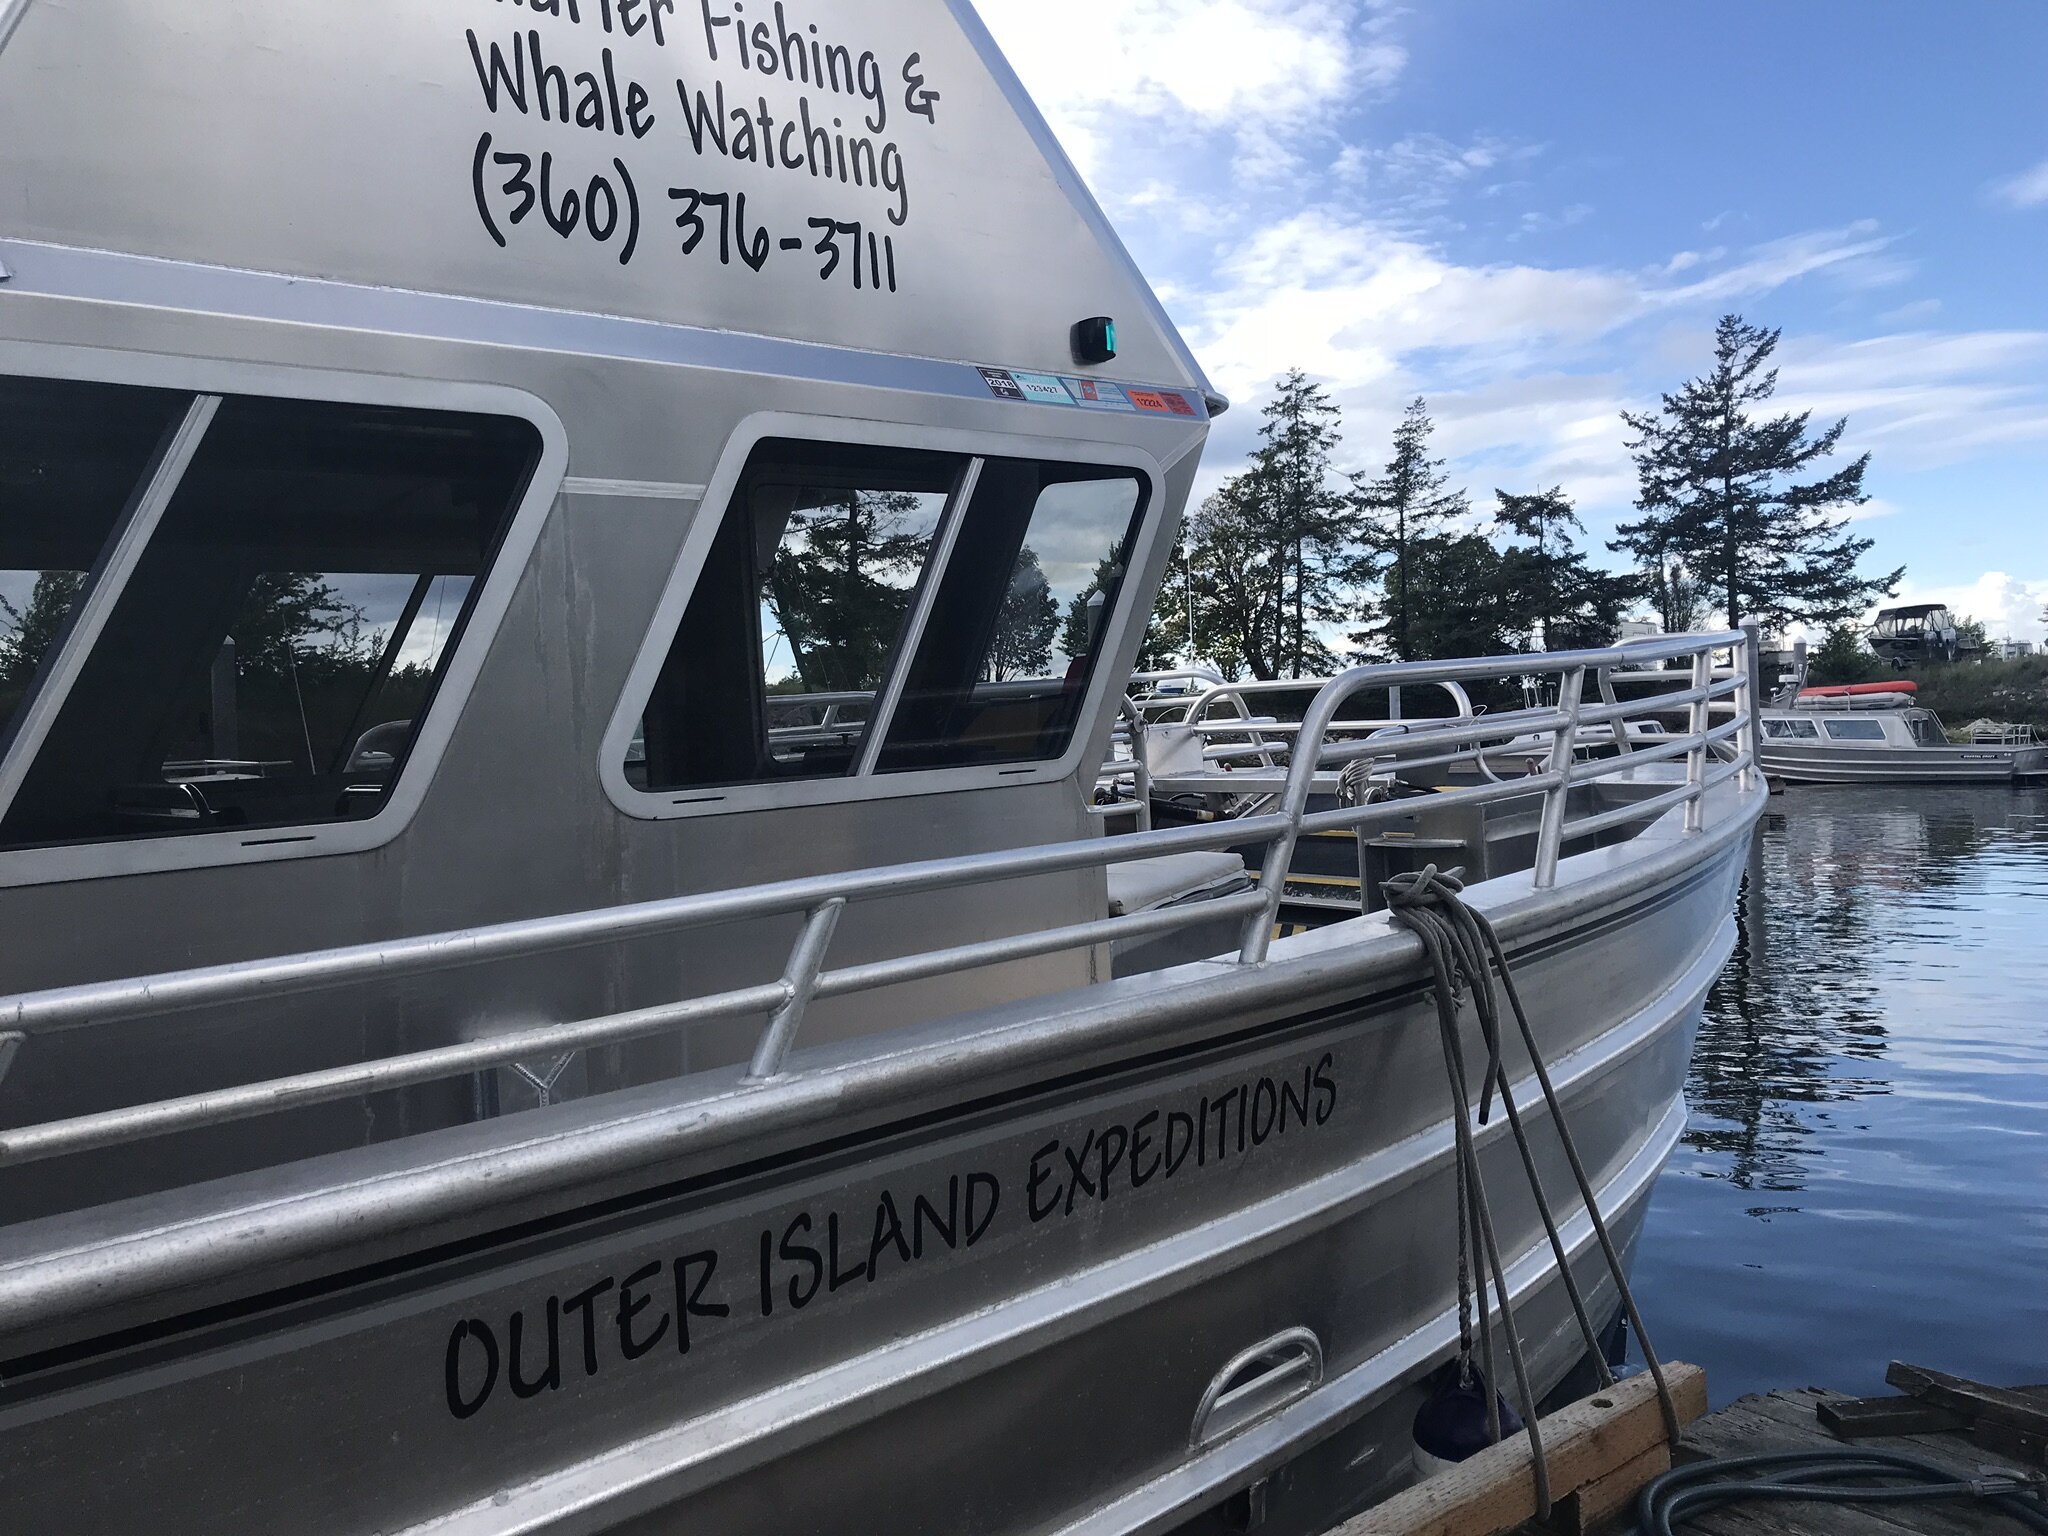  Whale watching, Orcas Island (images by Jacqui Gibson). 